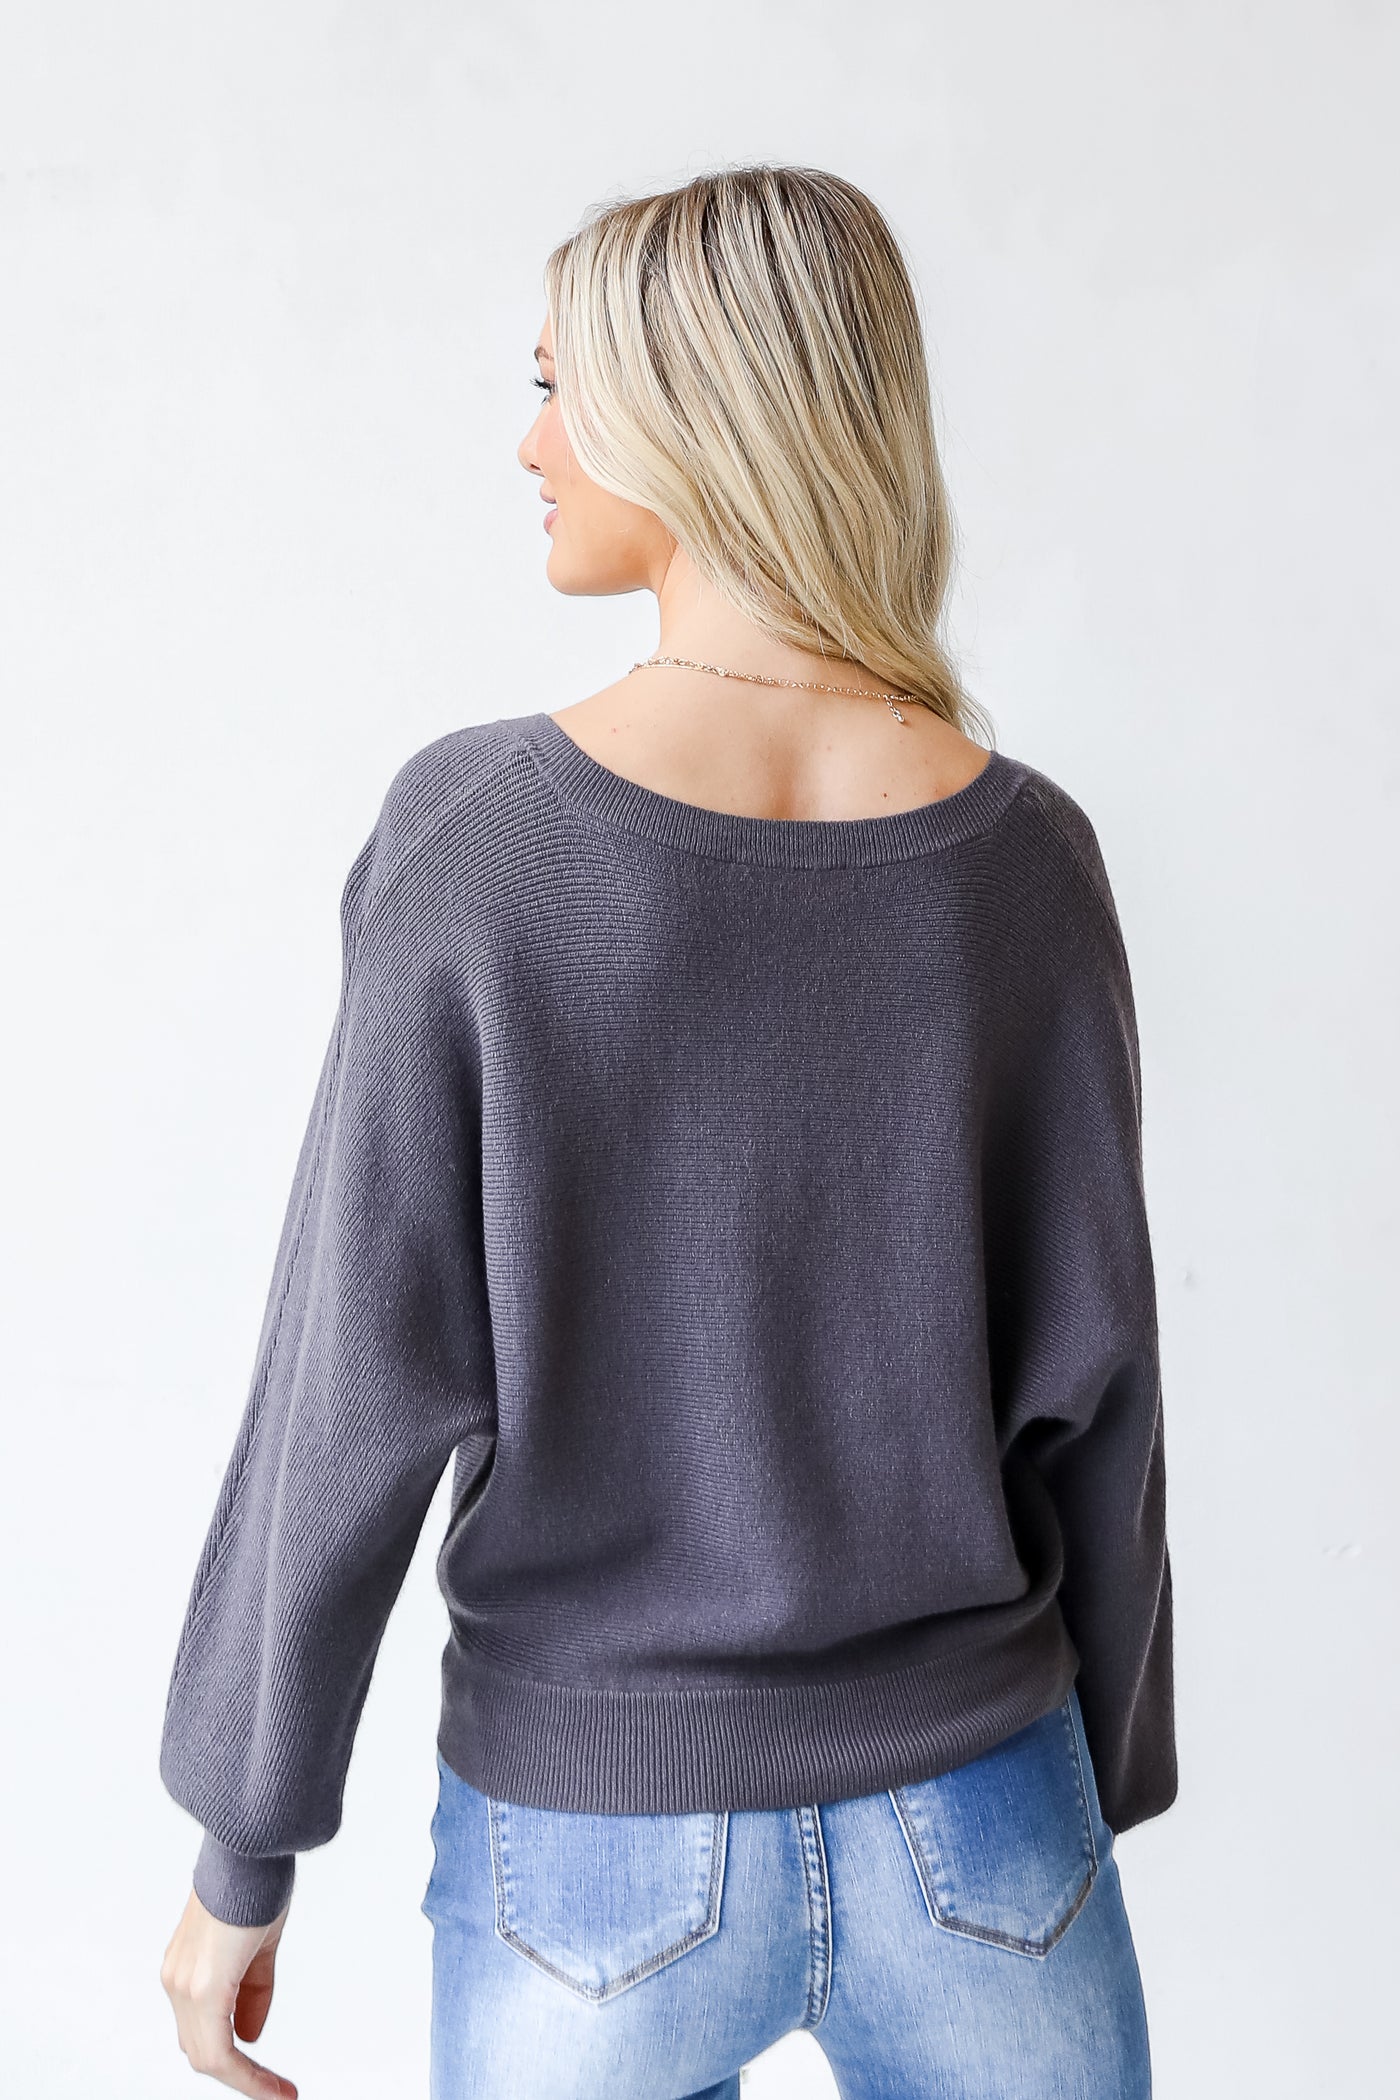 Sweater in grey back view